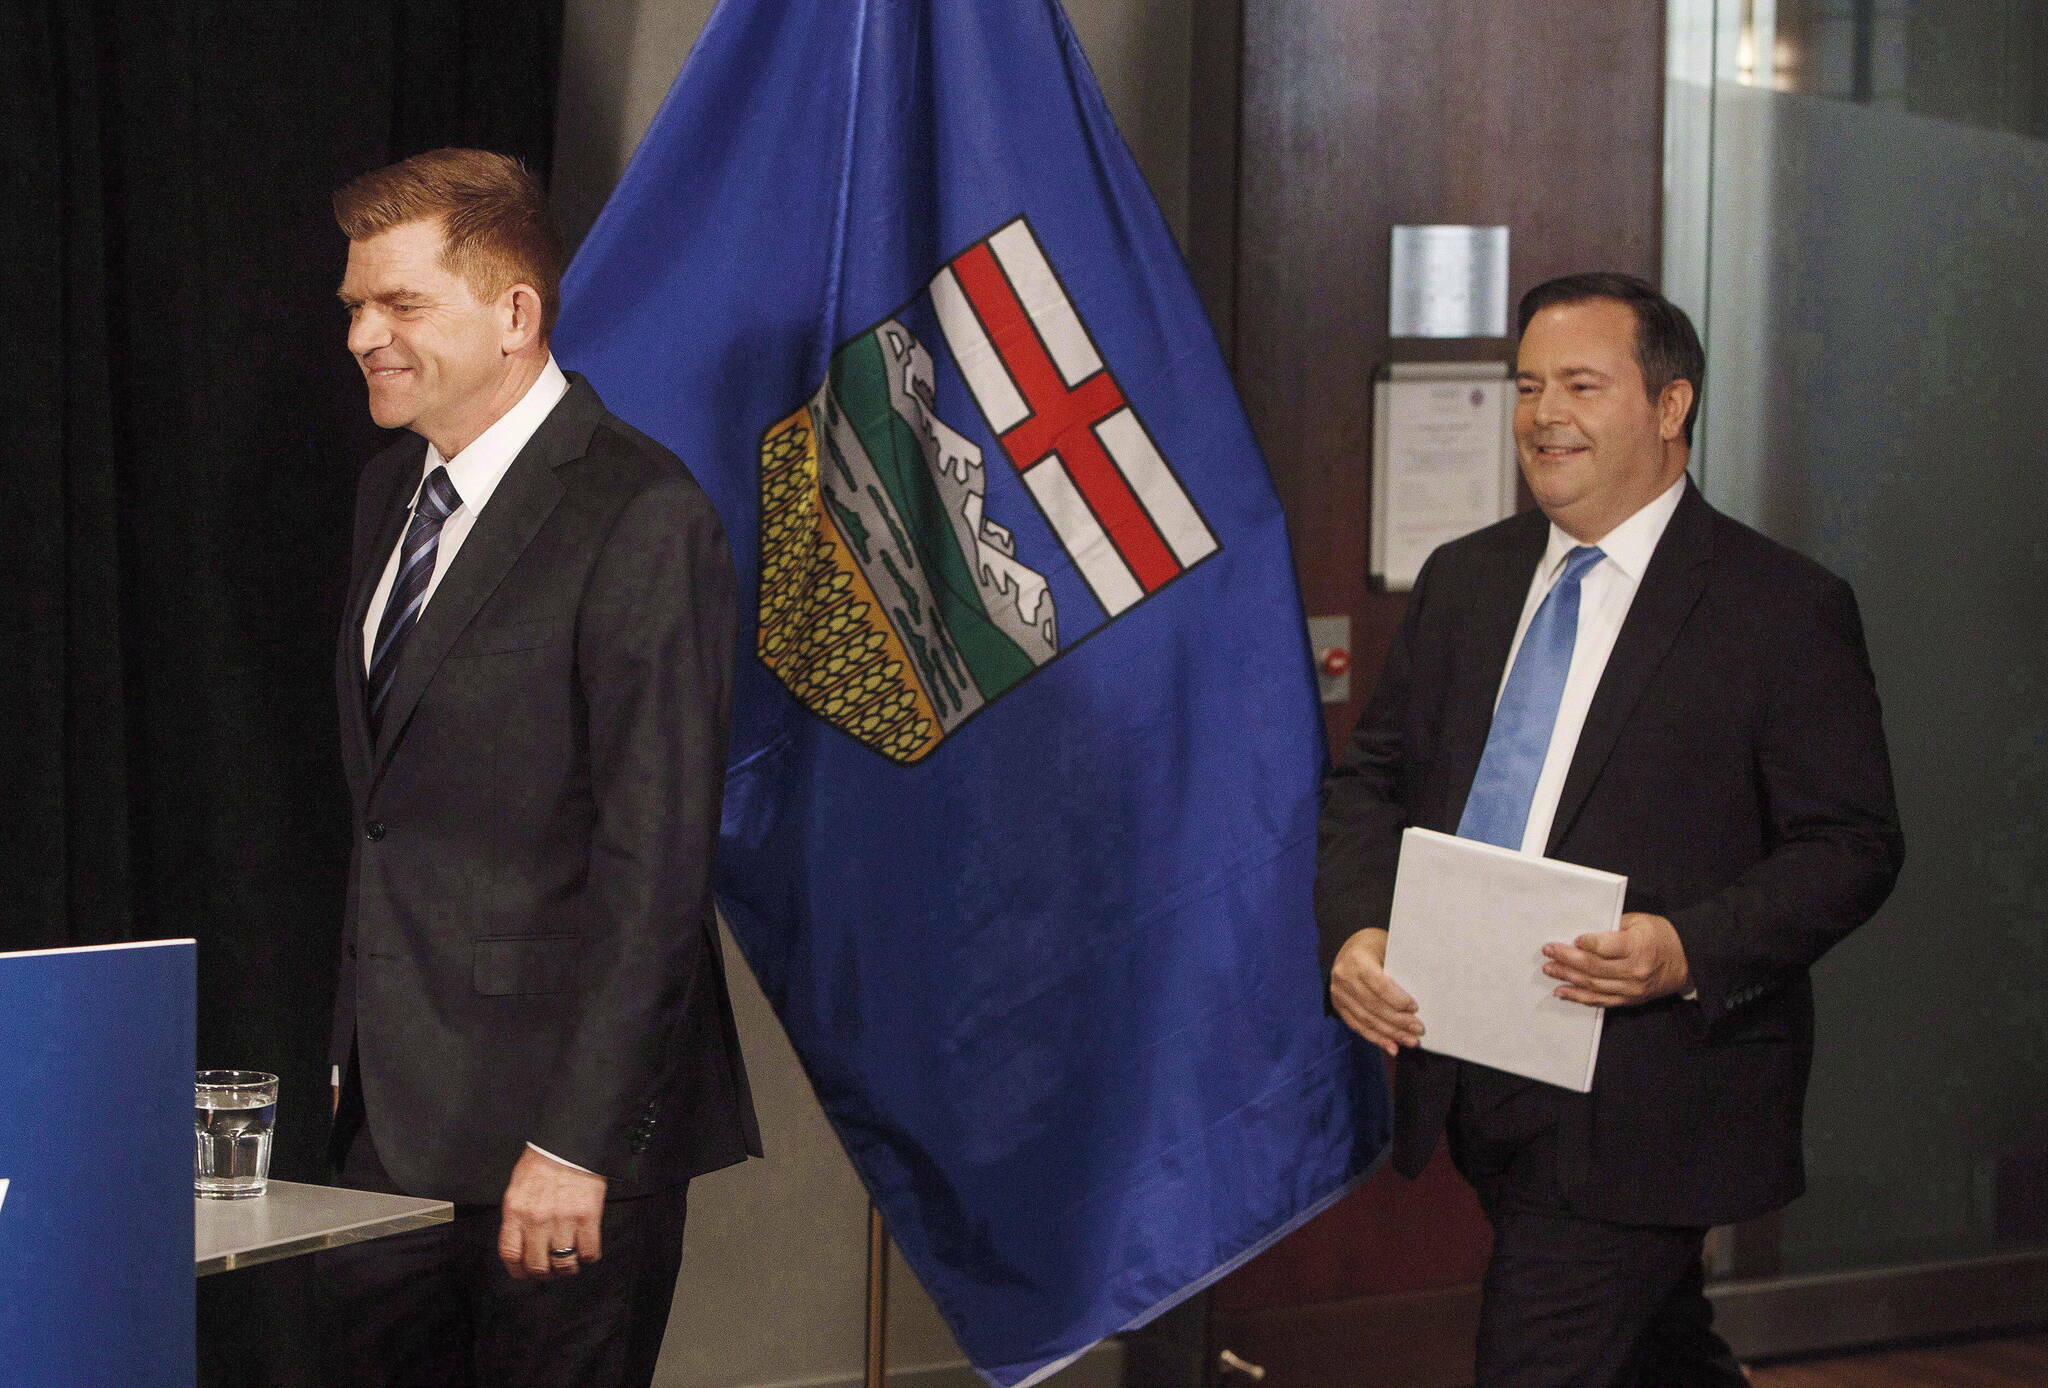 Alberta Wildrose leader Brian Jean, left, and Alberta PC leader Jason Kenney walk in to a press conference to announce a unity deal between the two in Edmonton on Thursday, May 18, 2017. THE CANADIAN PRESS/Jason Franson